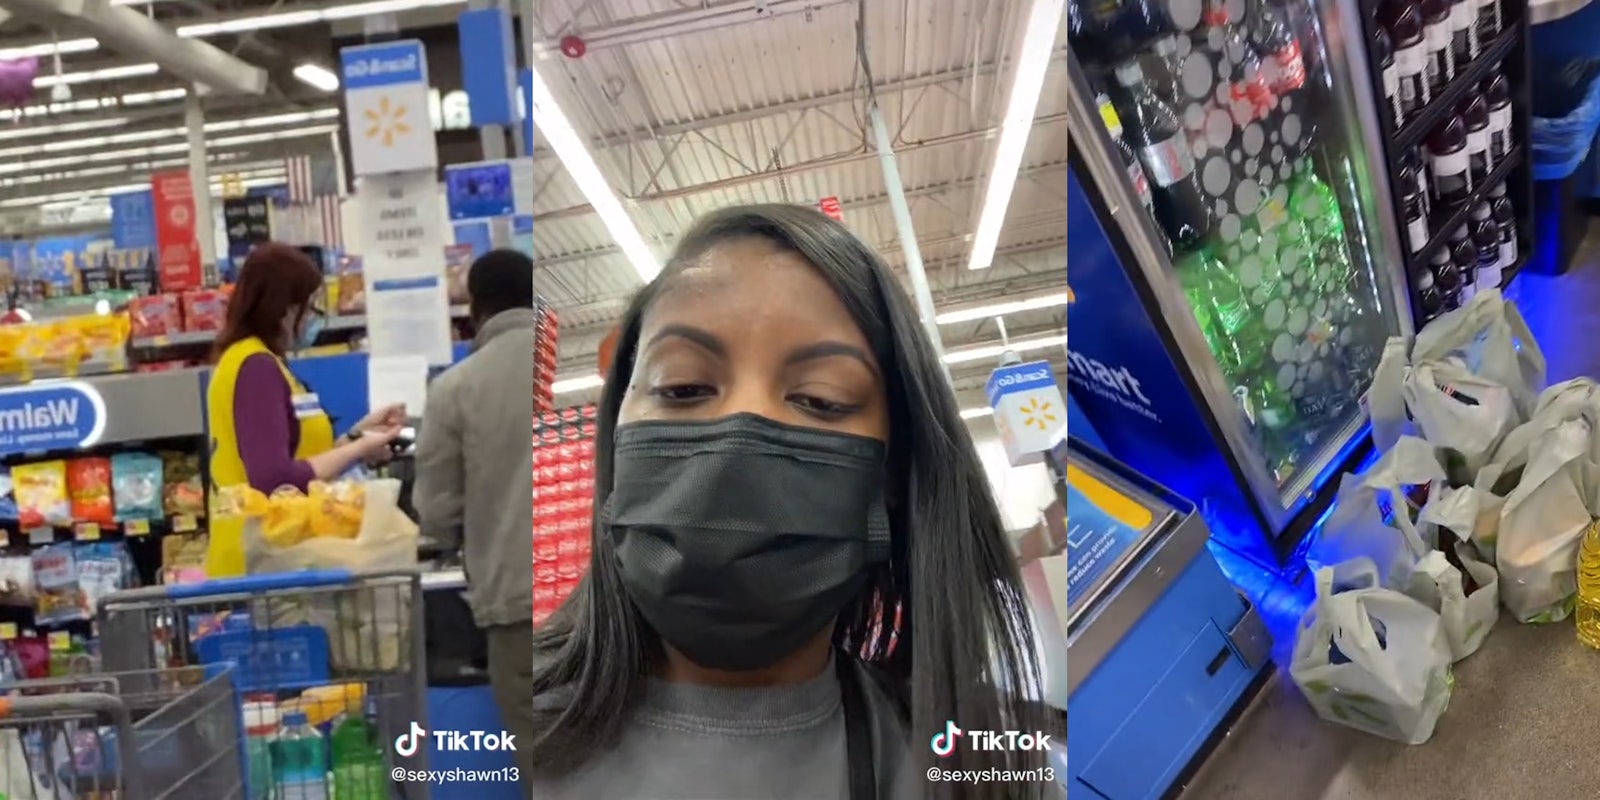 walmart worker at register (l) woman in mask (c) bagged items on floor (r)